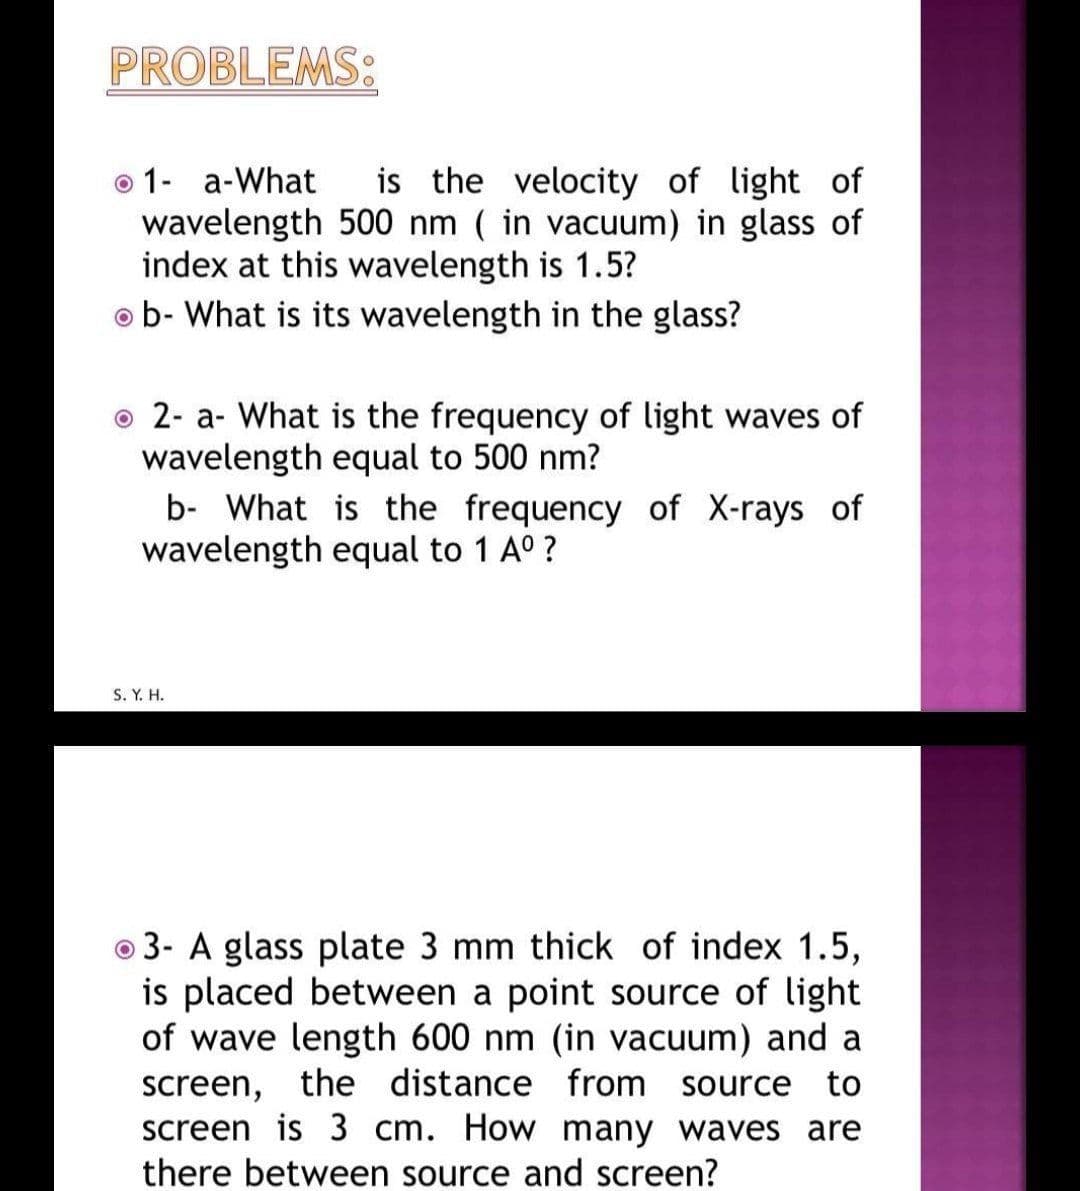 PROBLEMS:
is the velocity of light of
o 1- a-What
wavelength 500 nm ( in vacuum) in glass of
index at this wavelength is 1.5?
o b- What is its wavelength in the glass?
o 2- a- What is the frequency of light waves of
wavelength equal to 500 nm?
b- What is the frequency of X-rays of
wavelength equal to 1 A° ?
S. Y. H.
o 3- A glass plate 3 mm thick of index 1.5,
is placed between a point source of light
of wave length 600 nm (in vacuum) and a
screen, the distance from source to
screen is 3 cm. How many waves are
there between source and screen?
